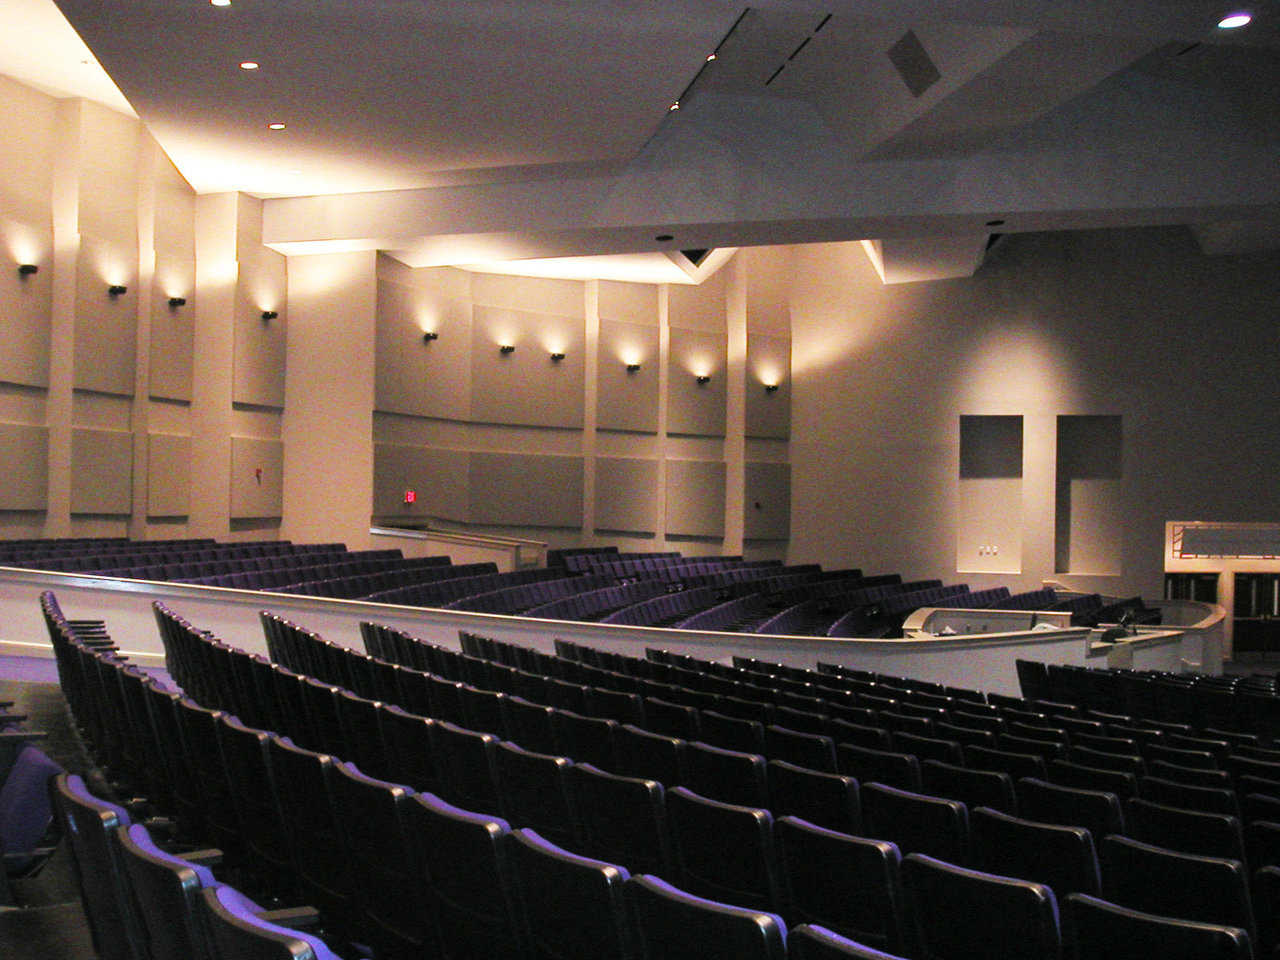 Sanctuary — It has a seating capacity for approximately 3,000.